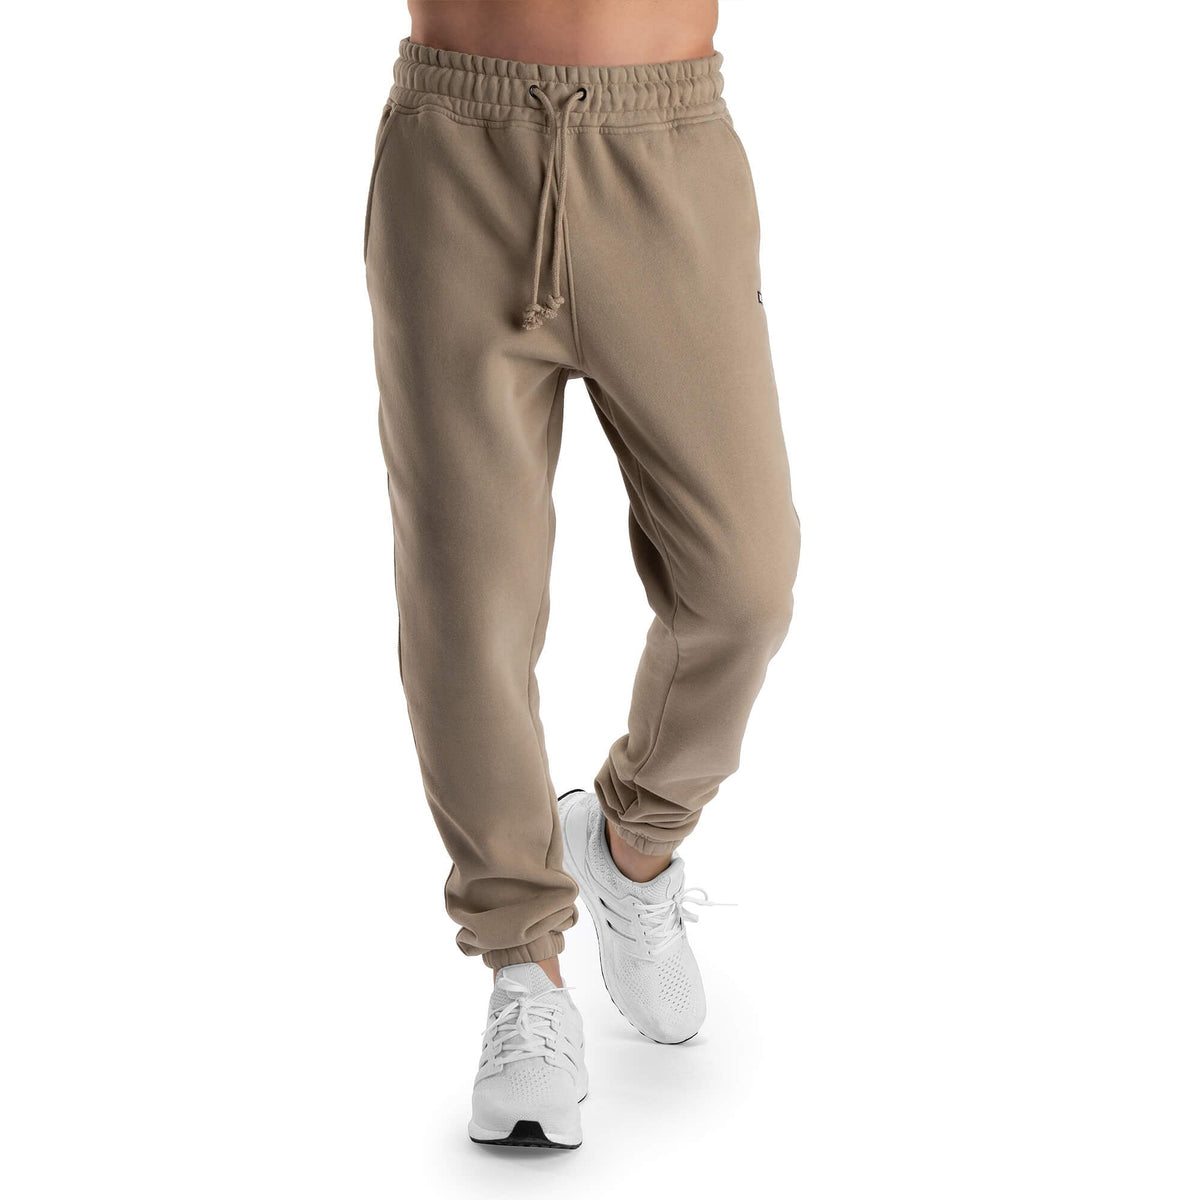 Beige Mid Rise Jogger Pants Online Shopping